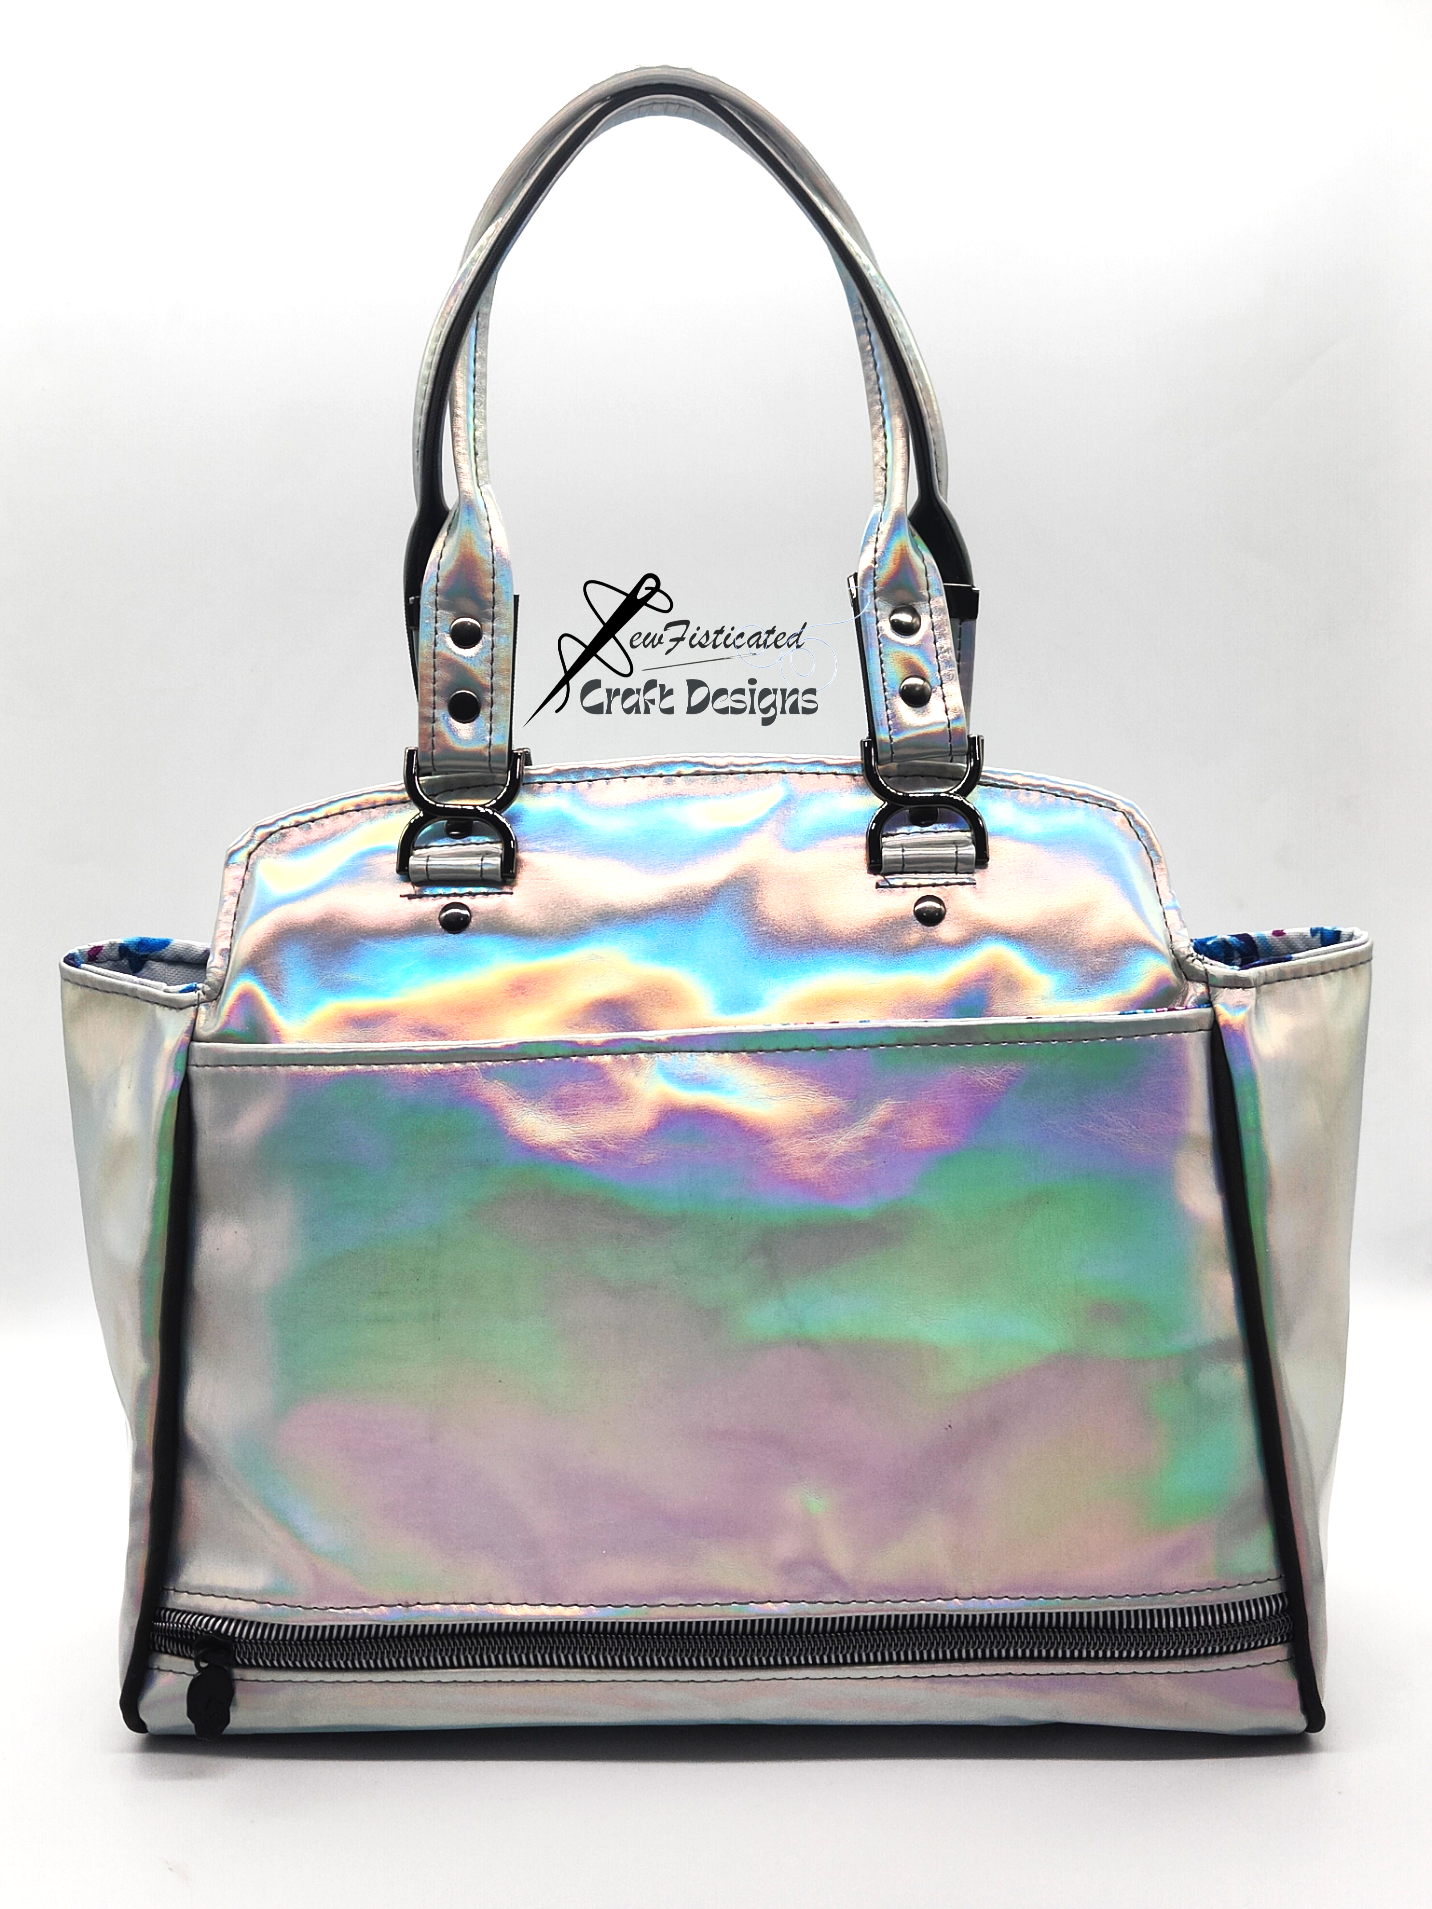 The Sewfisticated HexaTote - Metallic Silver Holographic